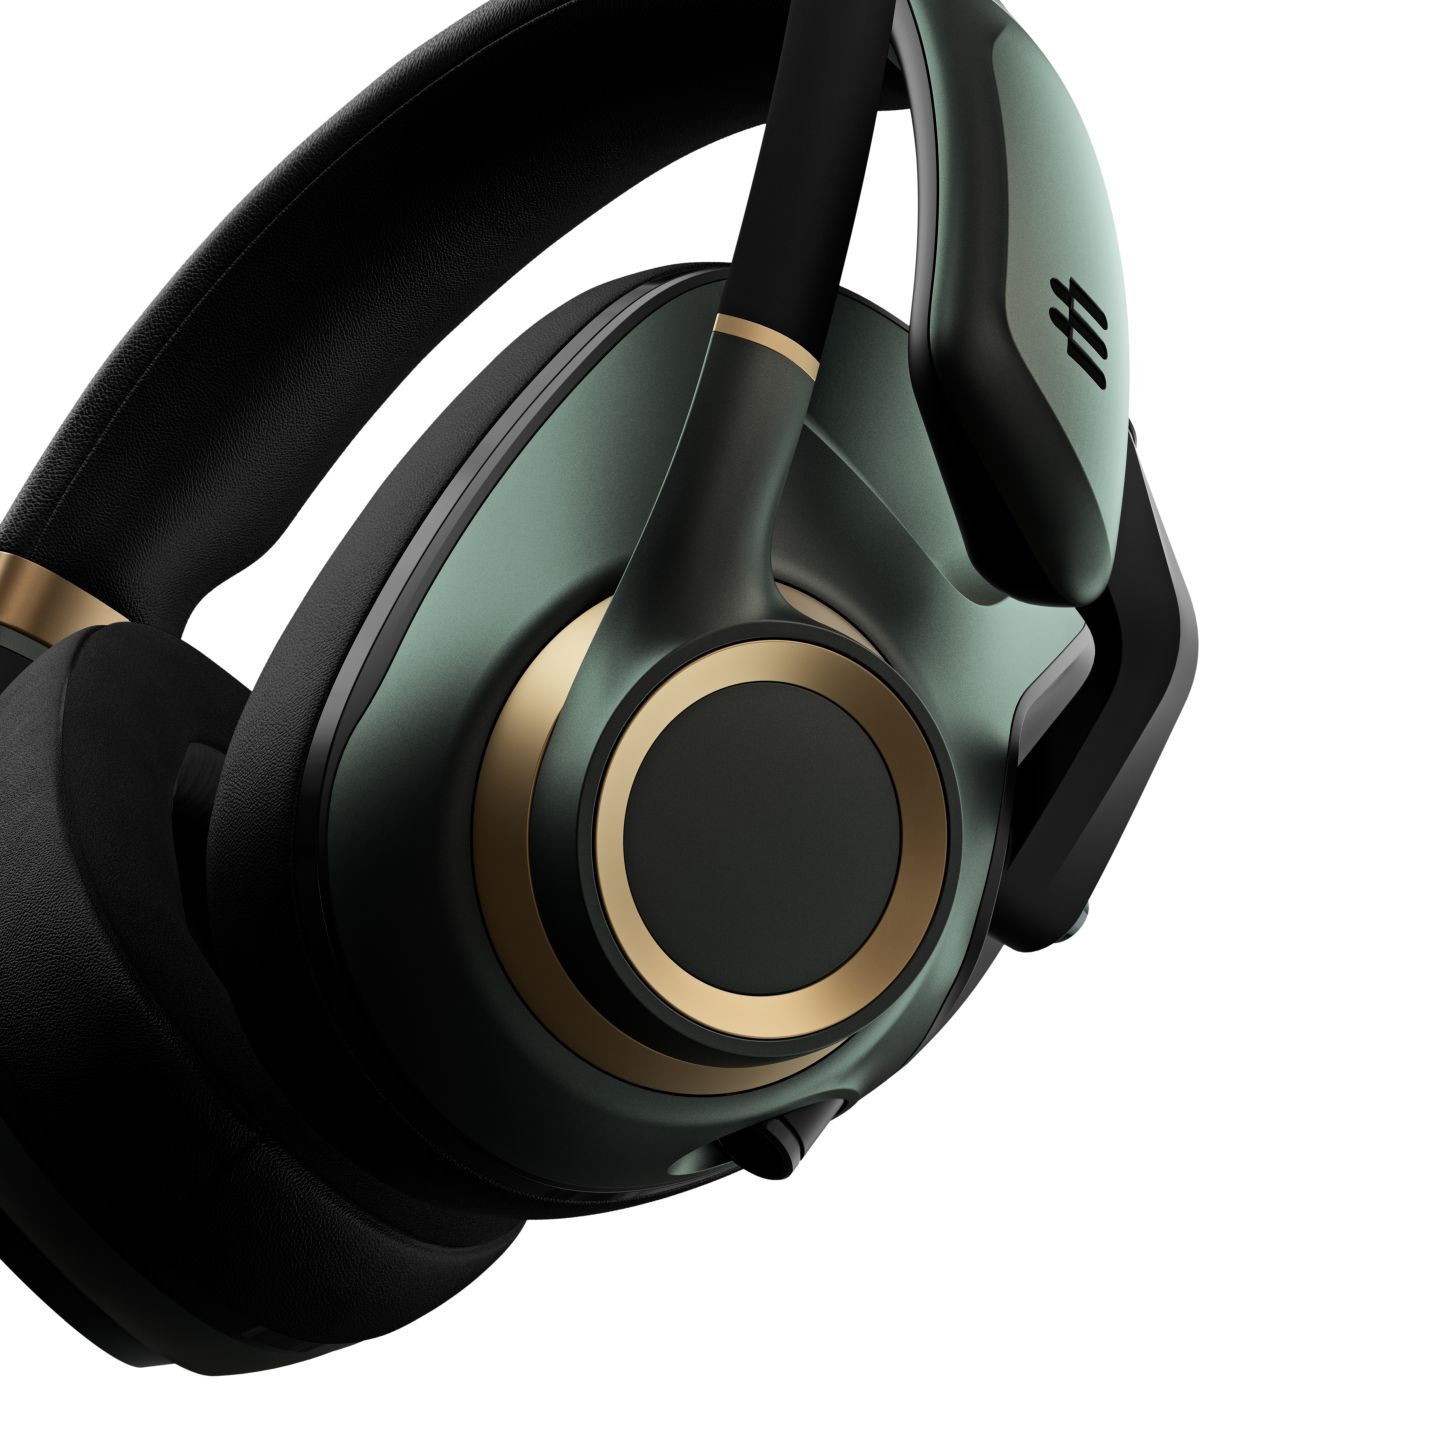 Im Test: EPOS Gaming-Headset H6PRO Closed Acoustic - XTgamer